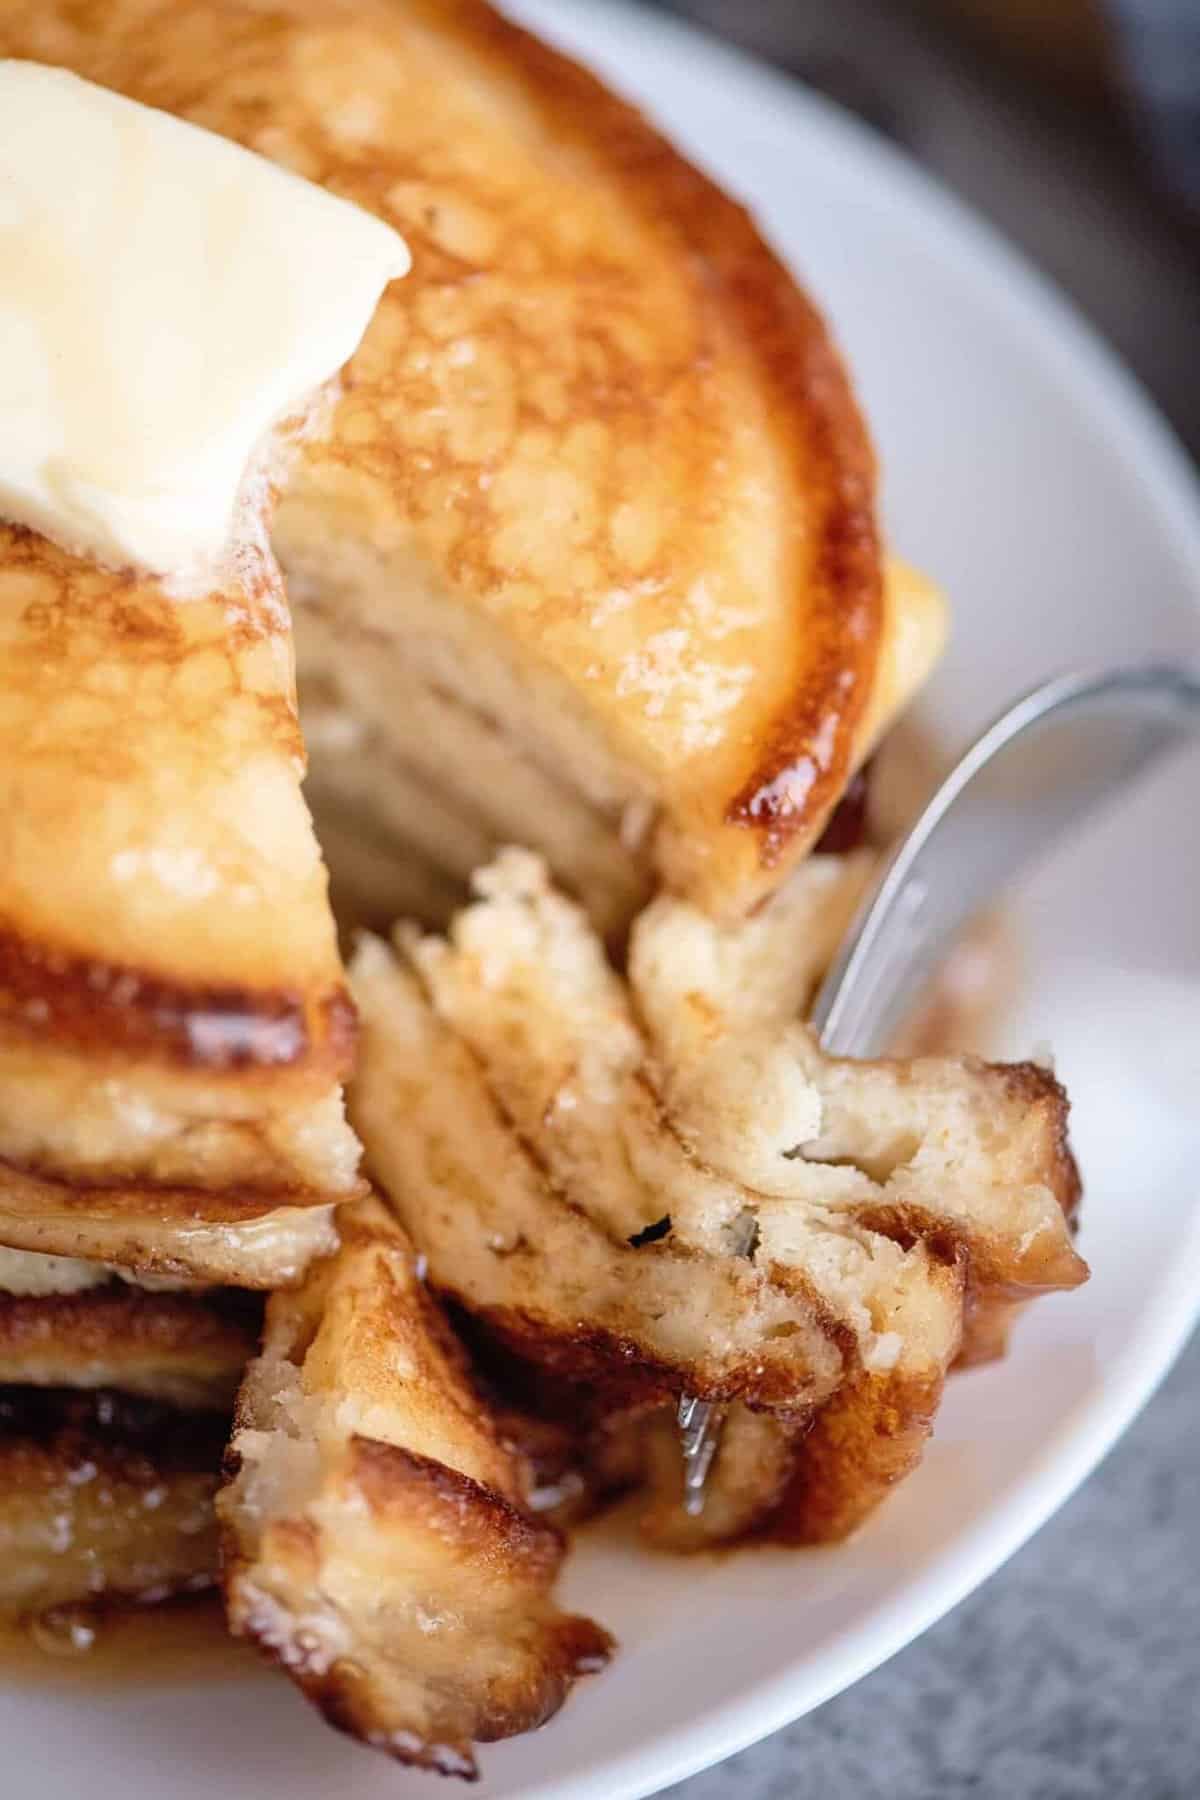 The Best Old-Fashioned Pancakes on Earth